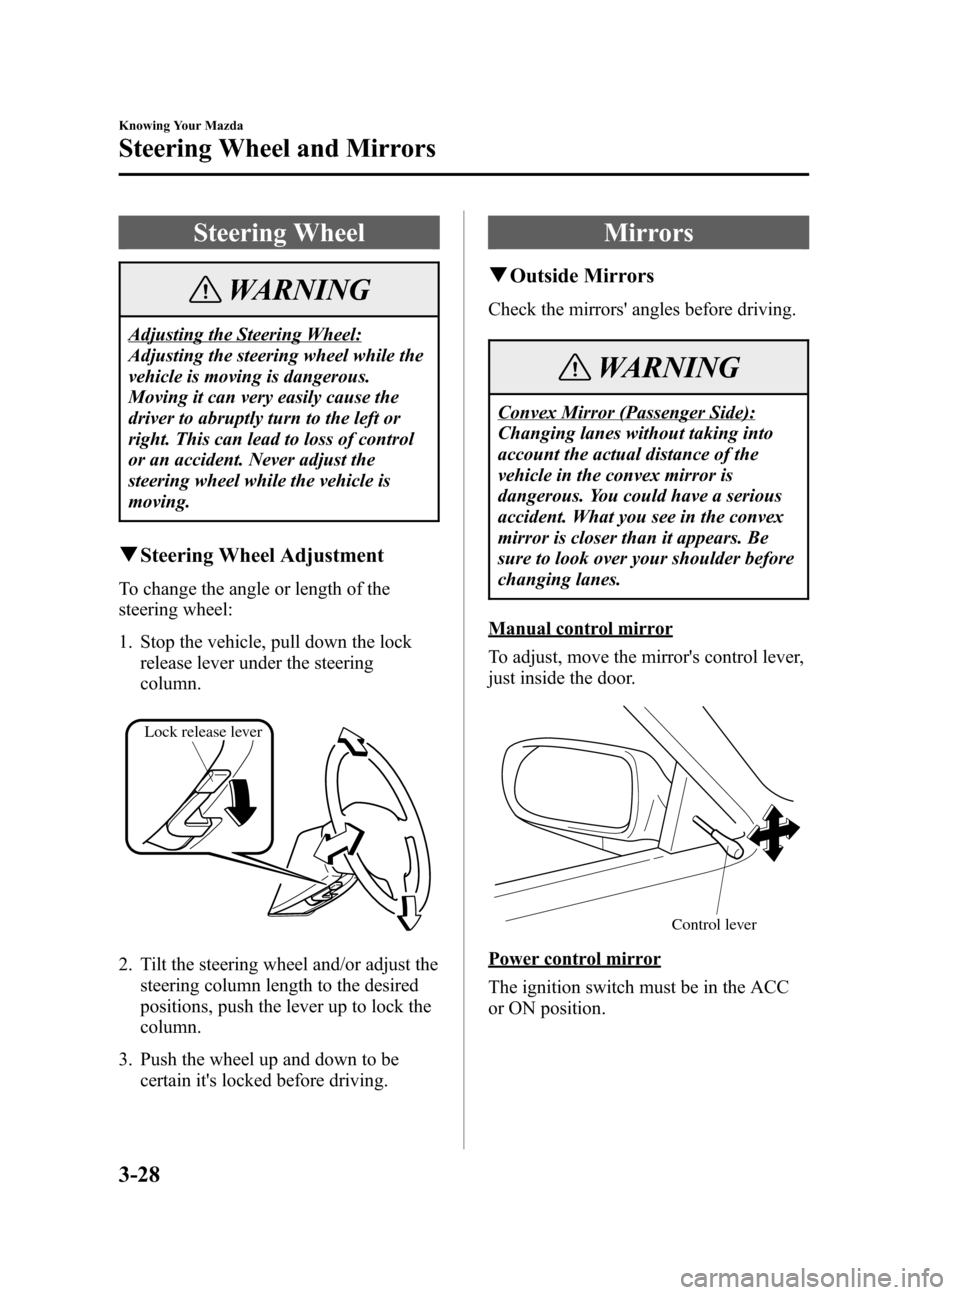 MAZDA MODEL 3 HATCHBACK 2005  Owners Manual (in English) Black plate (96,1)
Steering Wheel
WARNING
Adjusting the Steering Wheel:
Adjusting the steering wheel while the
vehicle is moving is dangerous.
Moving it can very easily cause the
driver to abruptly tu